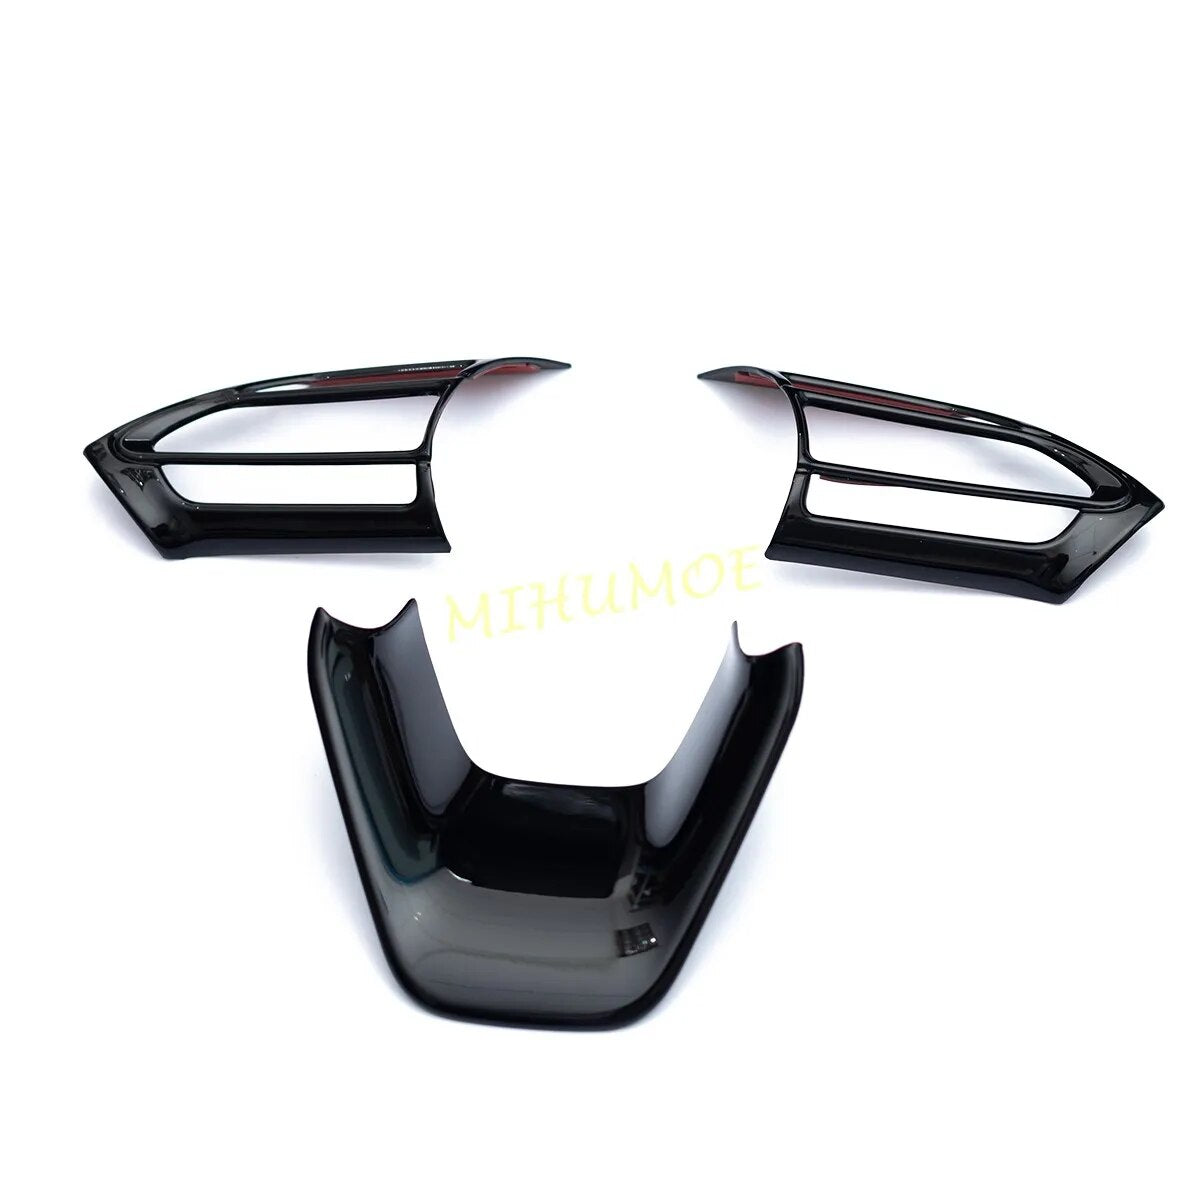 Glossy Black Interior Steering Wheel Switch Cover Trims For Toyota Yaris Cross 2021 2022 2023